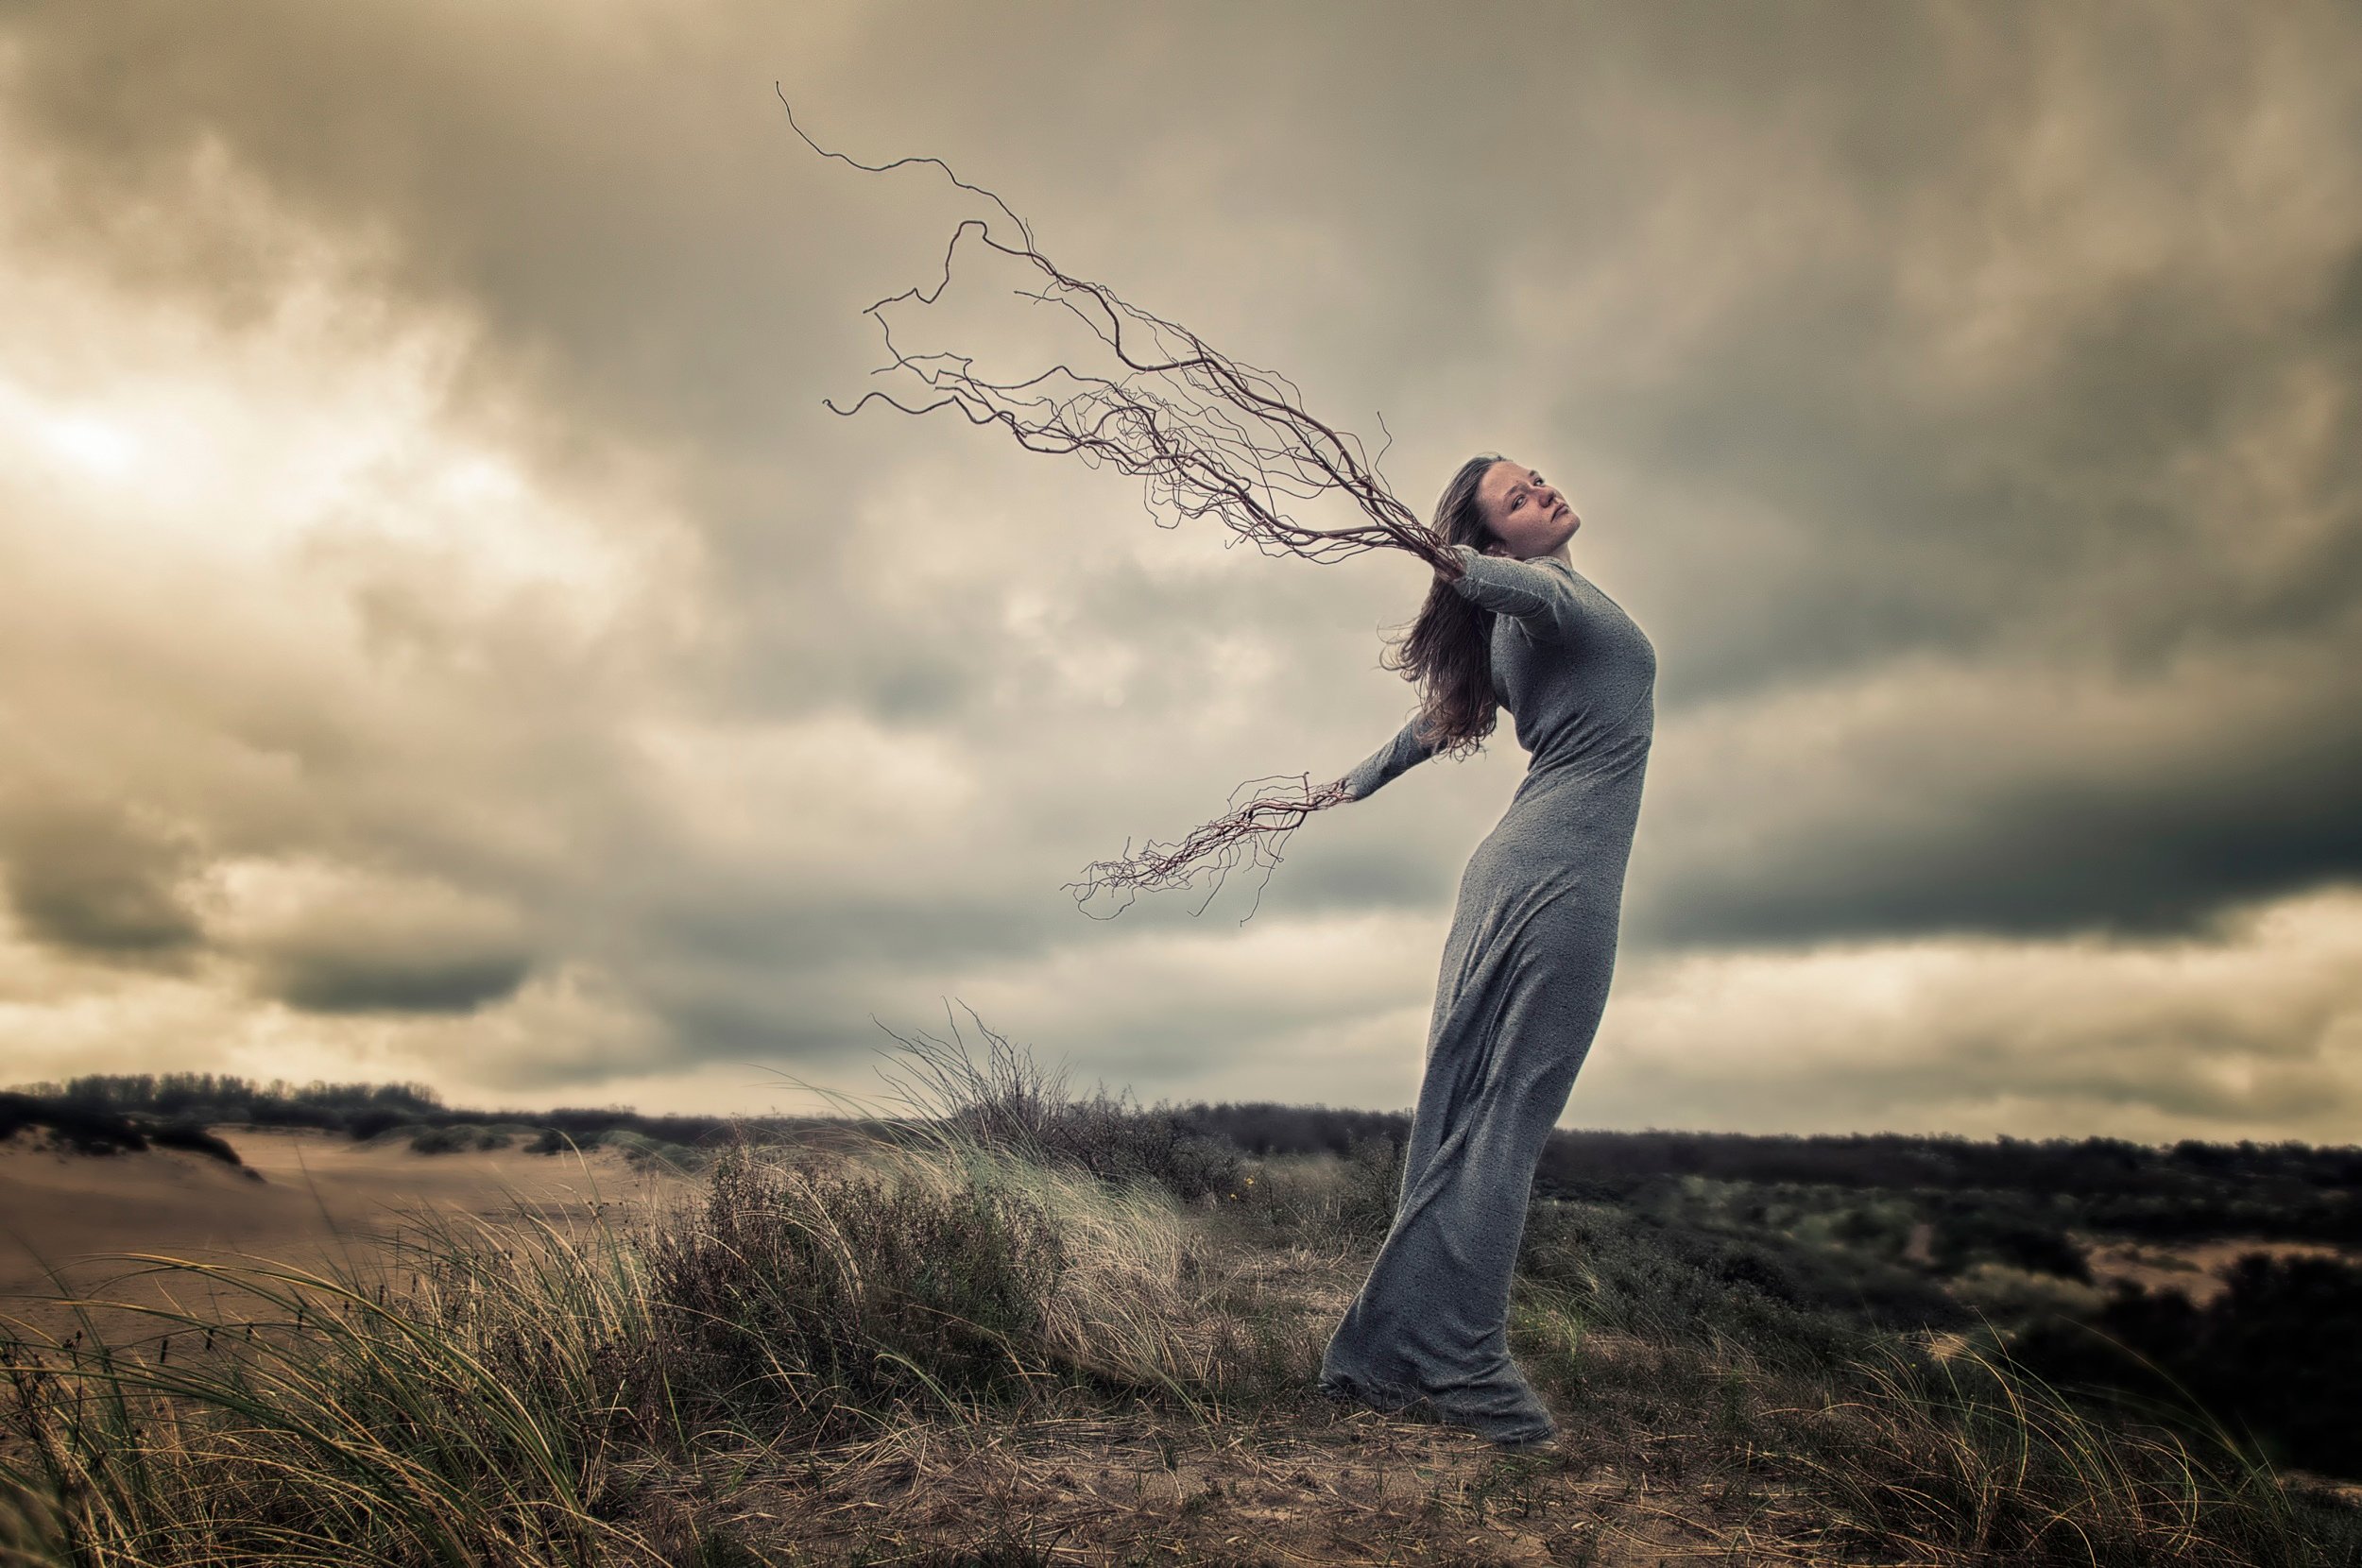 wind, Girl, Hands, Roots, Drean, Witch, Wicca, Wiccan, Earth, Mood, Nature, Manipulation, Photoshop Wallpaper